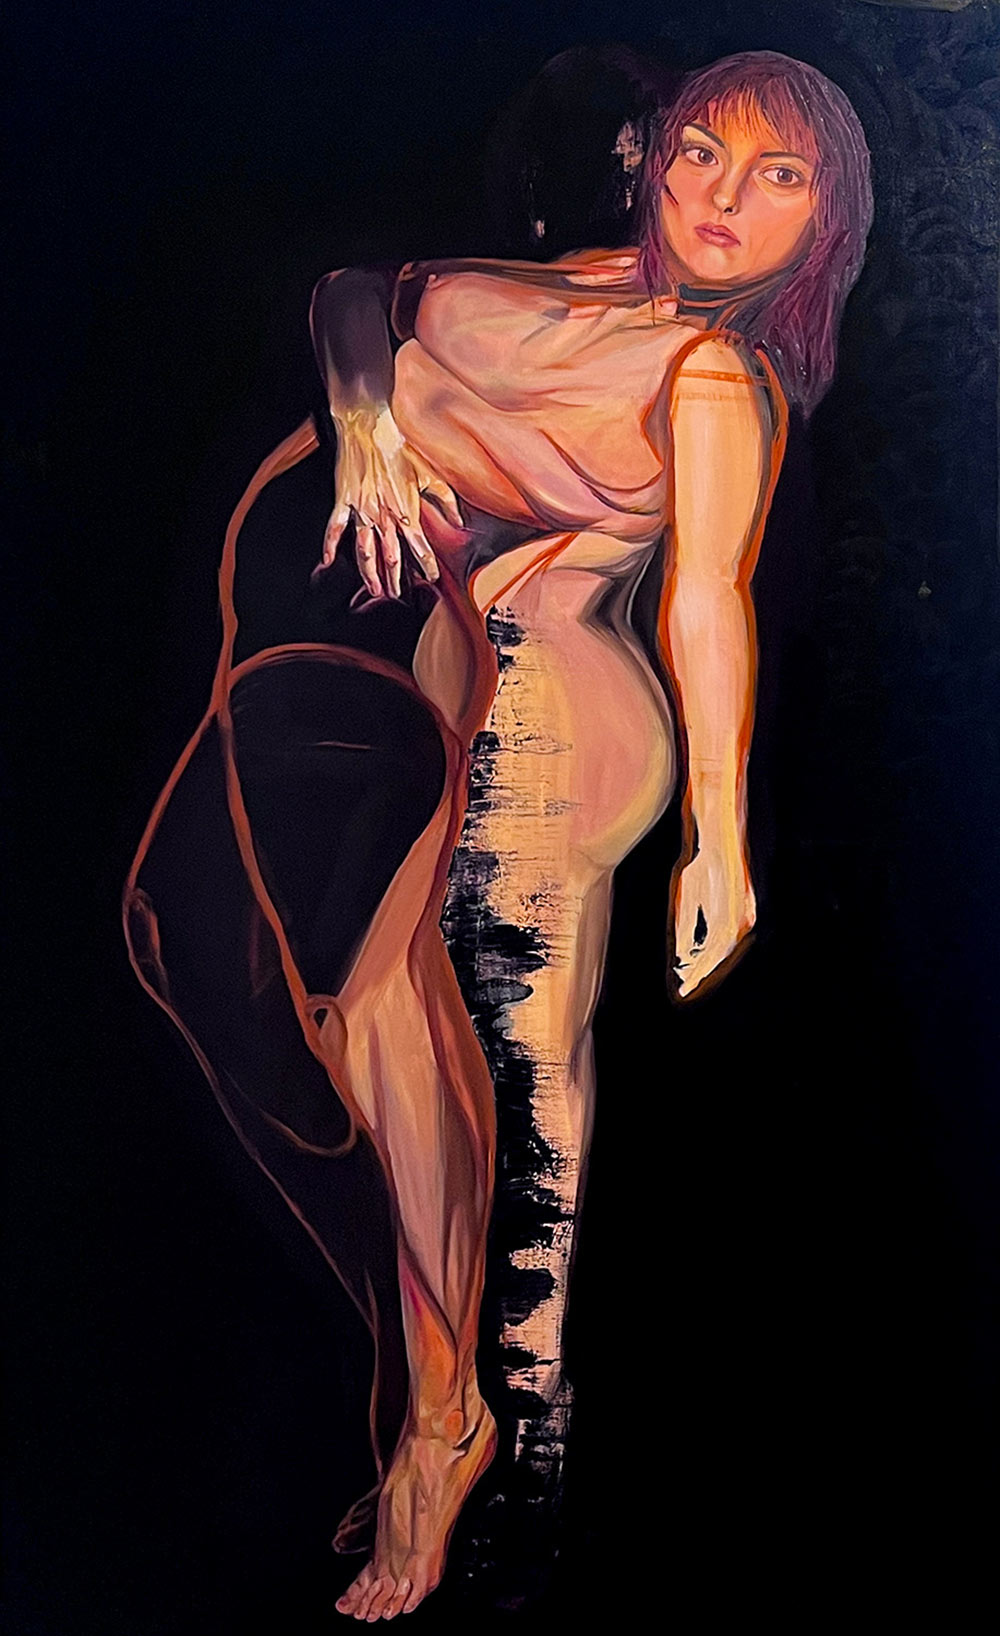 painting - A woman standing on her toes with her left arm hanging. The right hand grabs her twisted waist representing volume and strength or power. 